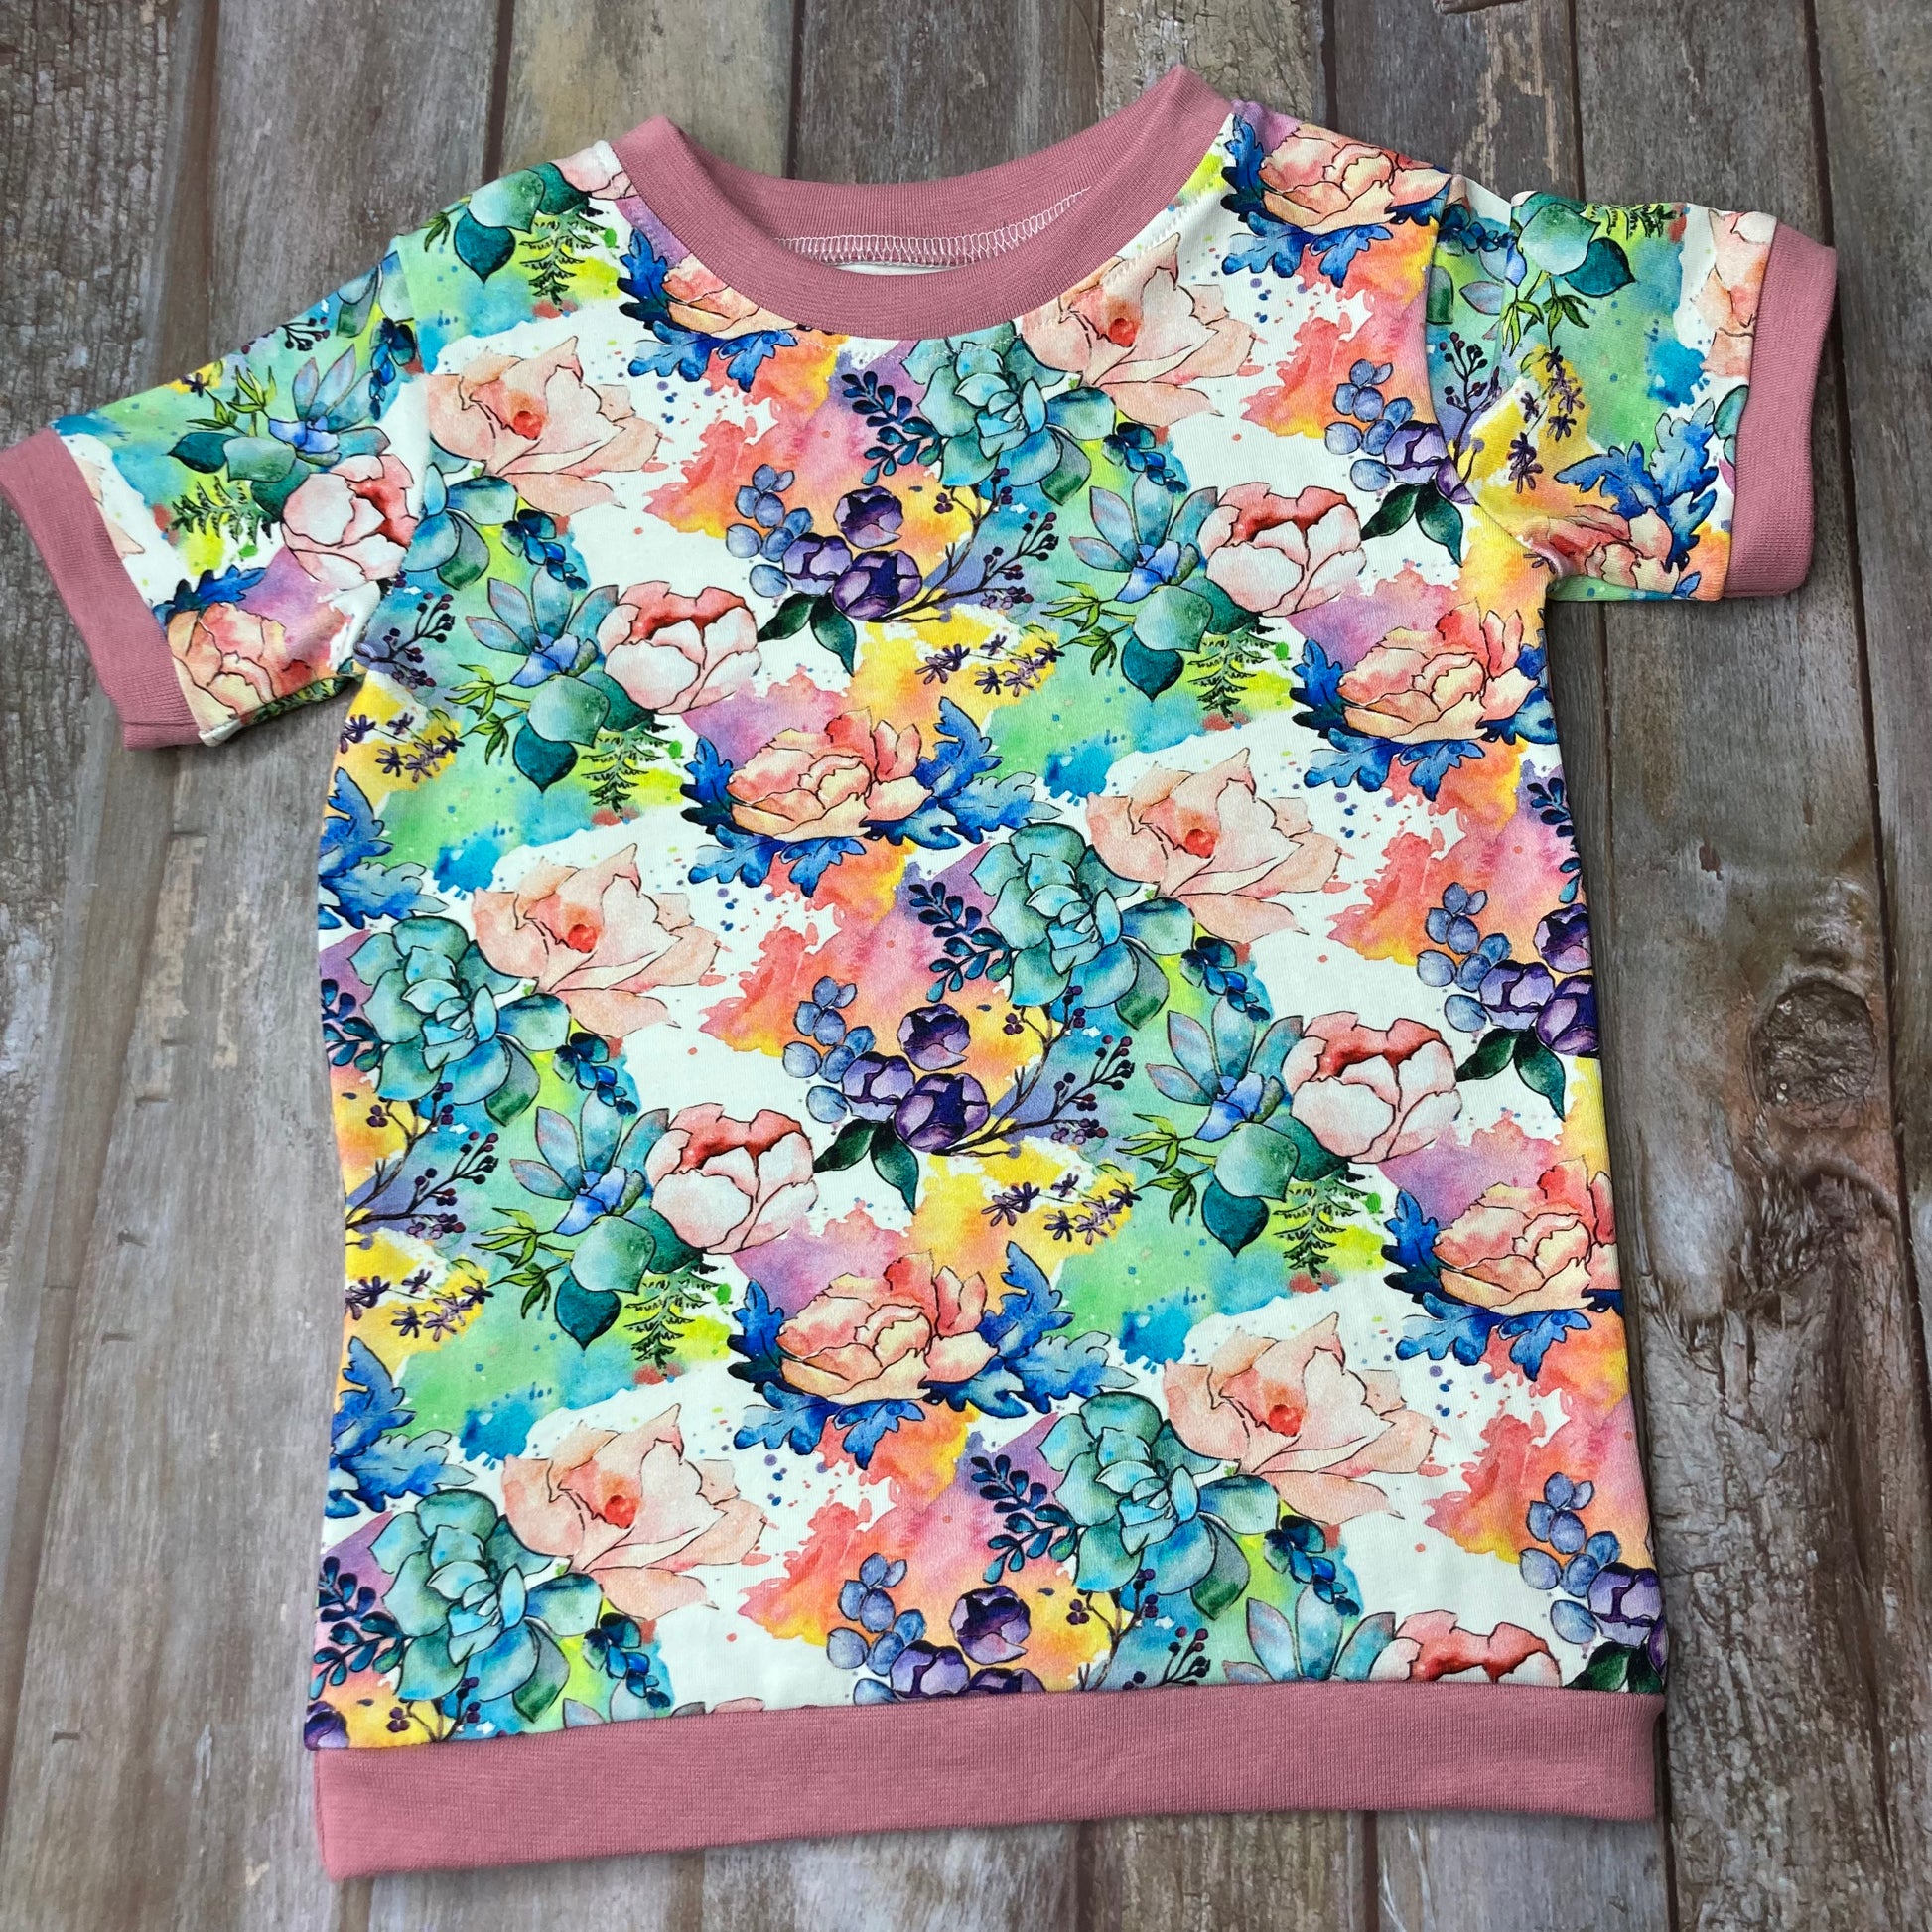 Kids Cuffed T-shirt cotton jersey - floral pink white green - age 1-4 - Uphouse Crafts